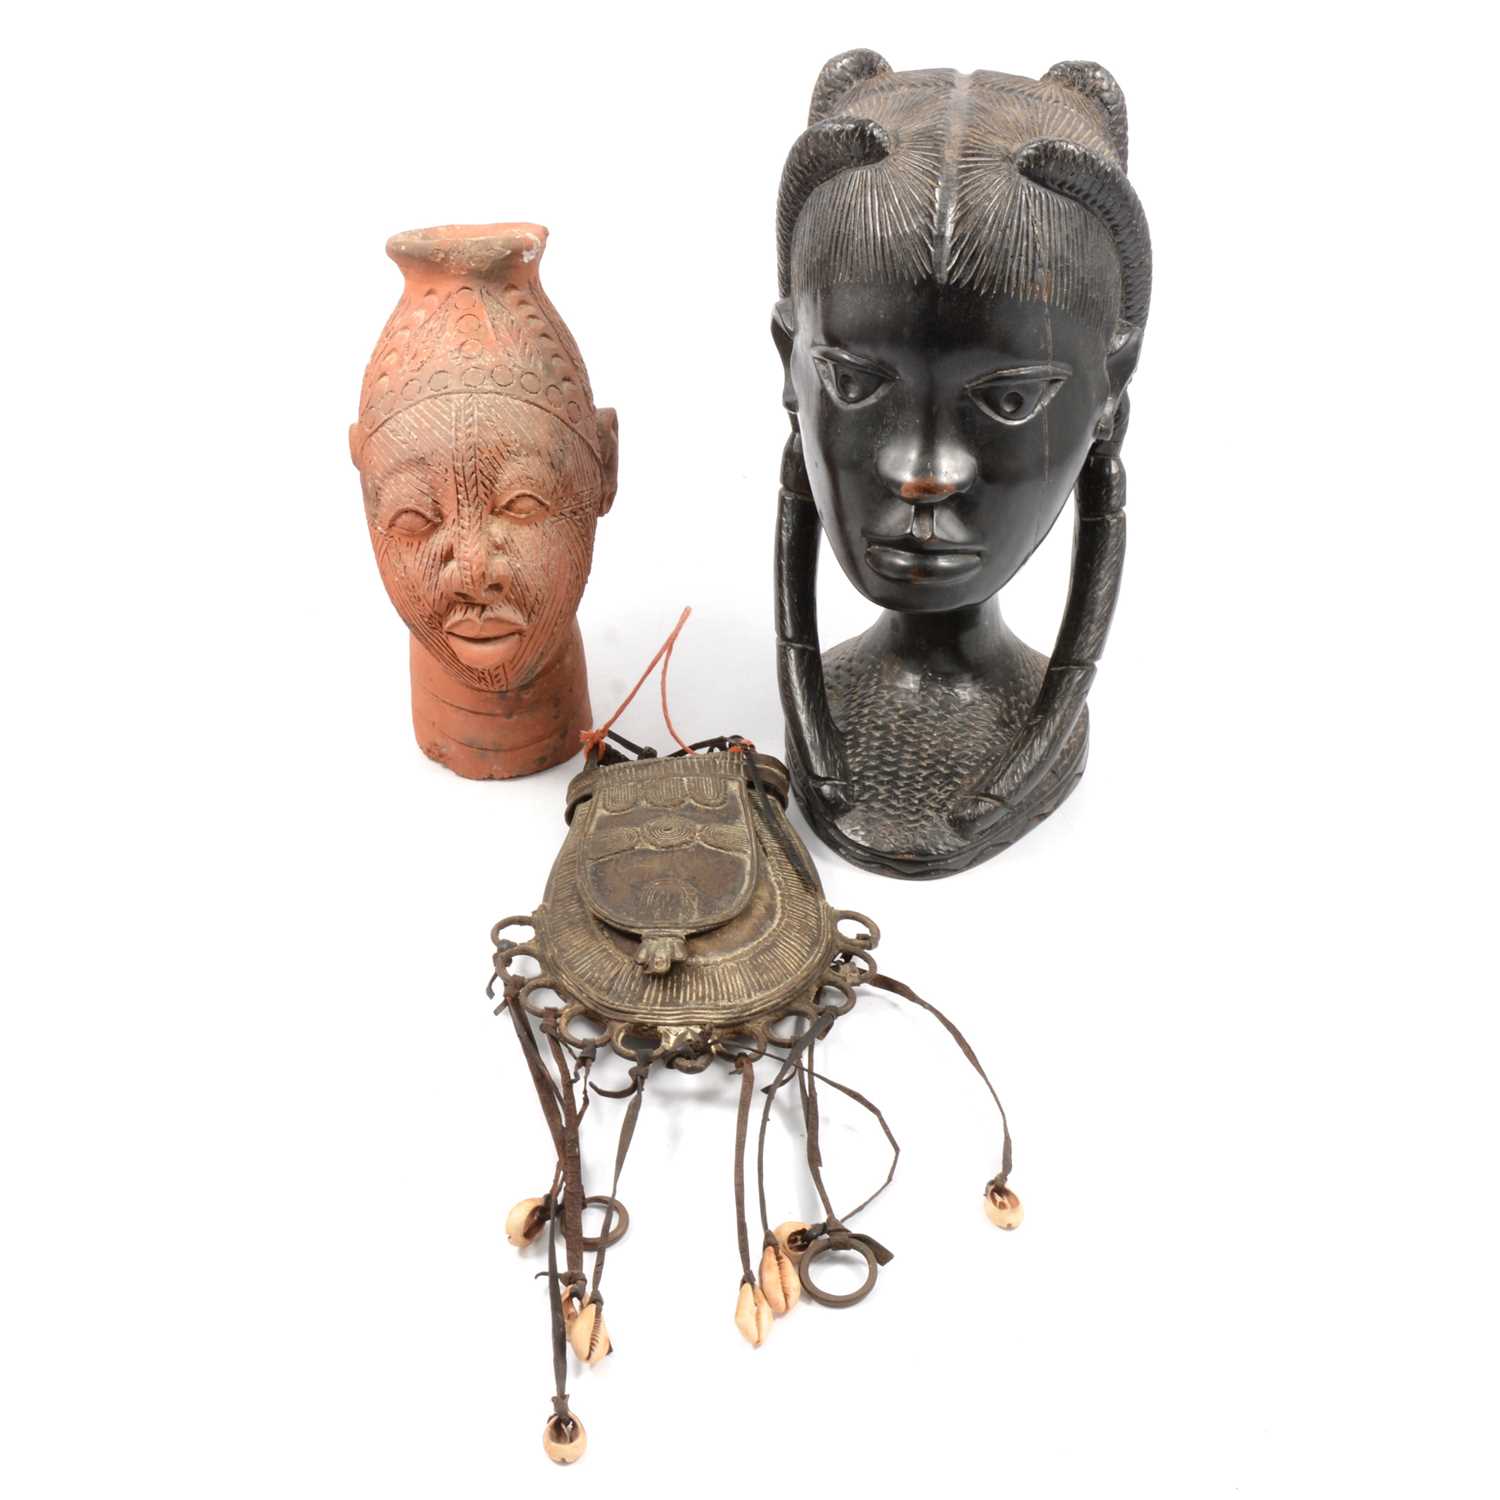 Lot 109 - Ethnographica interest - a Fulani cattle man's metal purse, Nigerian carved bust, Benin terracotta bust.